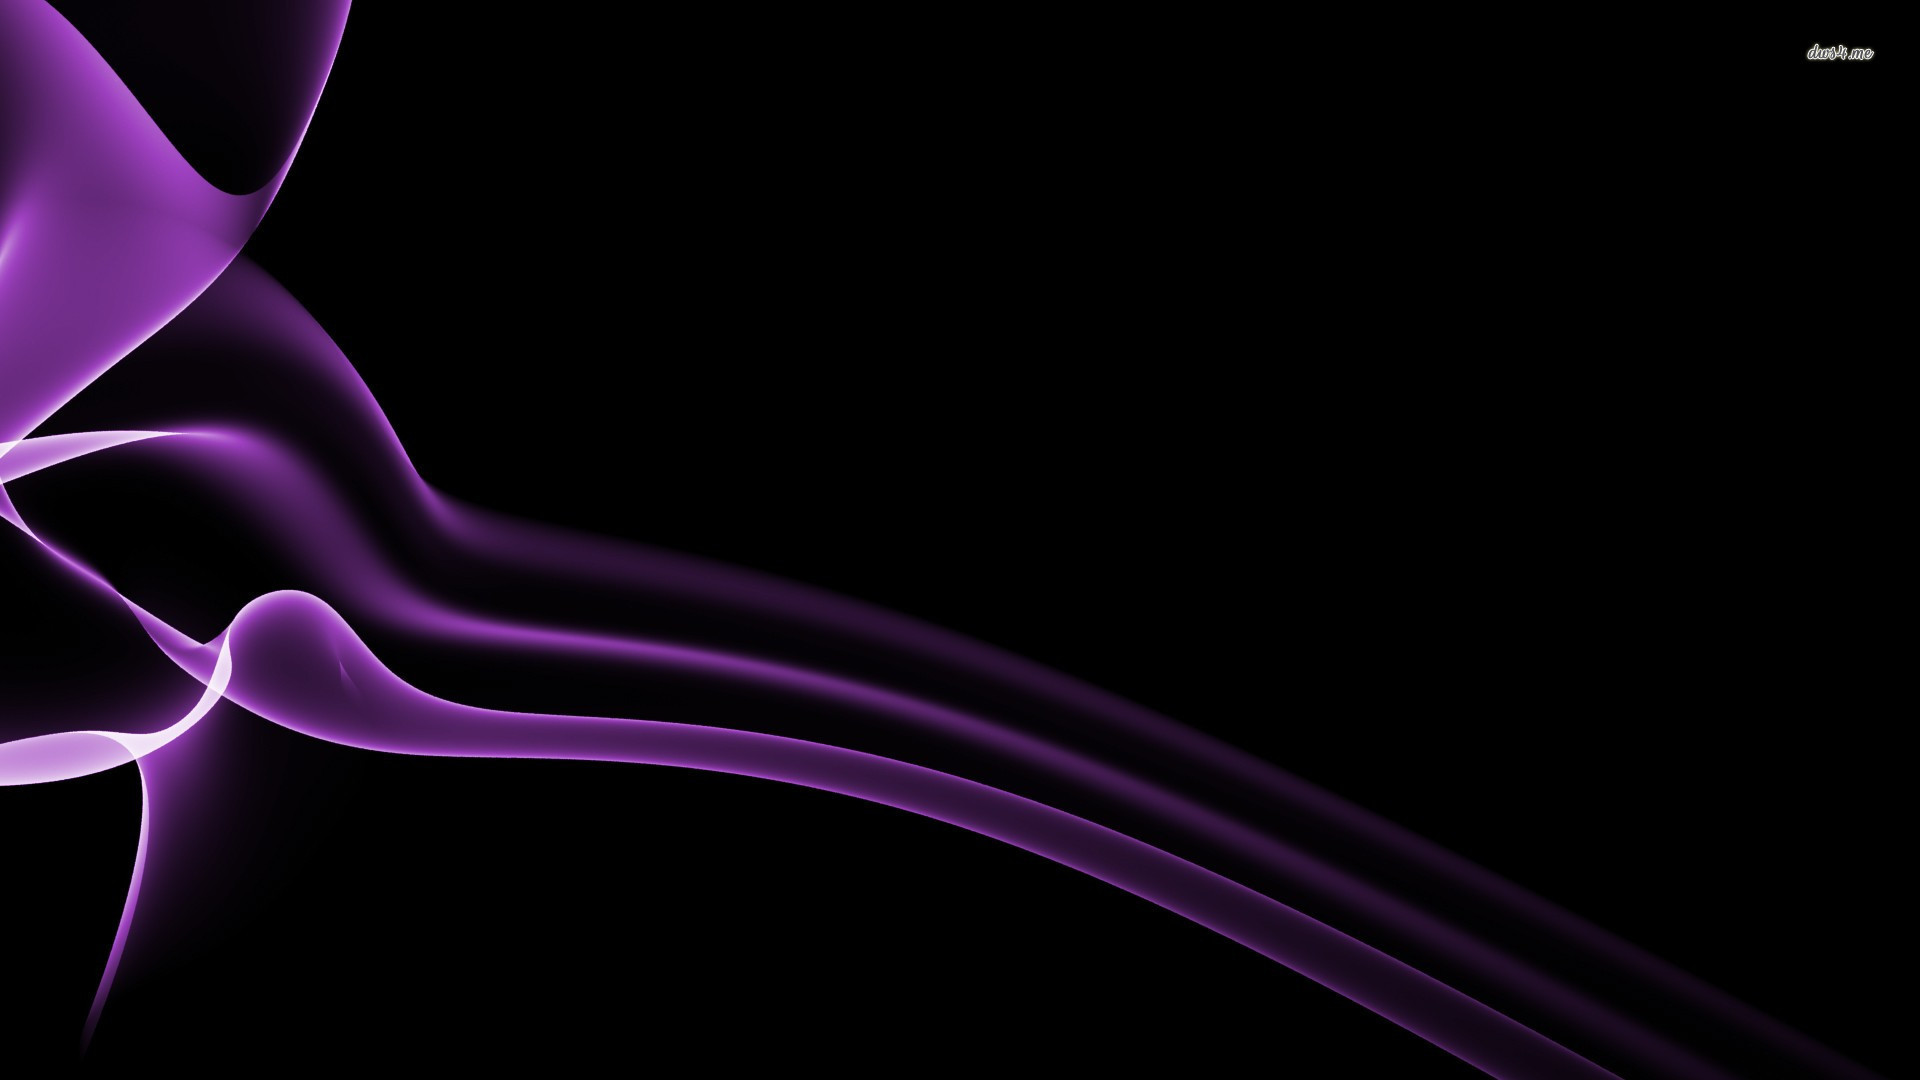 1920x1080 Black and Purple Abstract HD Background Wallpaper 518 - Amazing